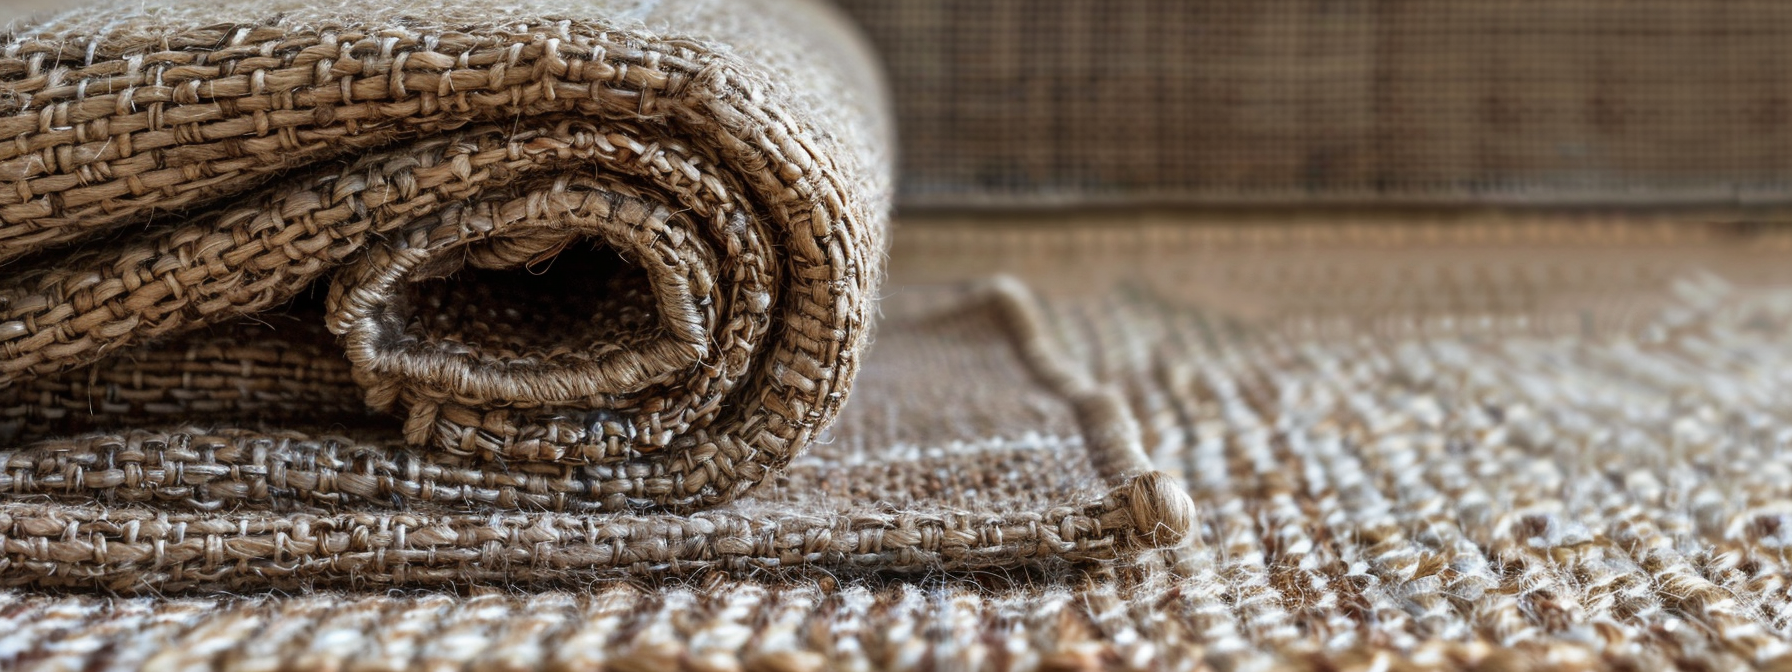 DIY Carpet Care Tools and Supplies: What You Need for Effective Home Maintenance